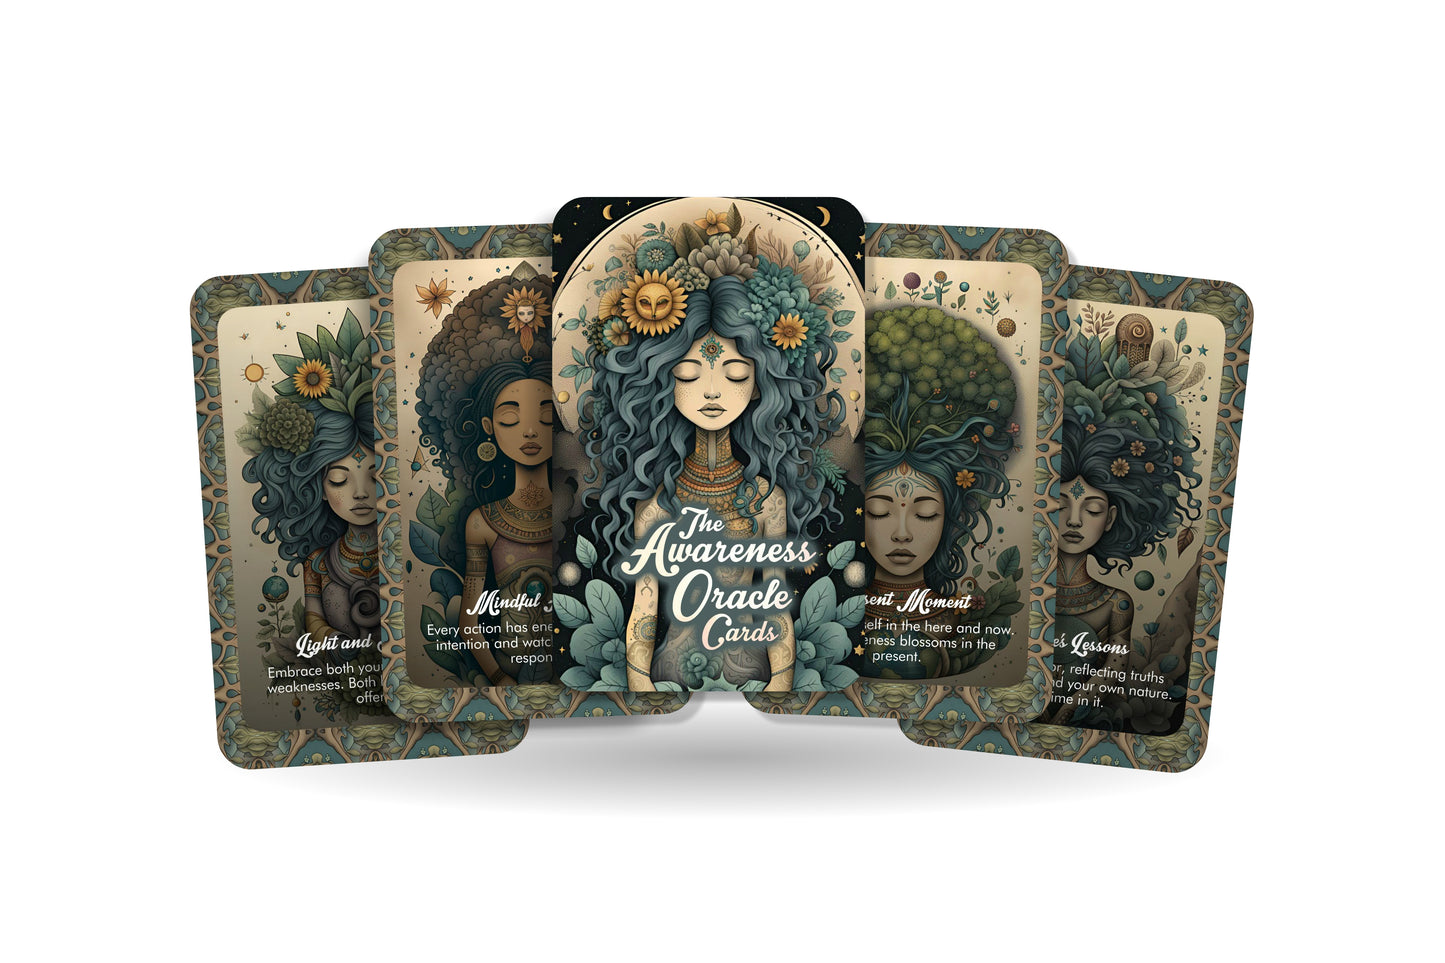 The Awareness Oracle Cards